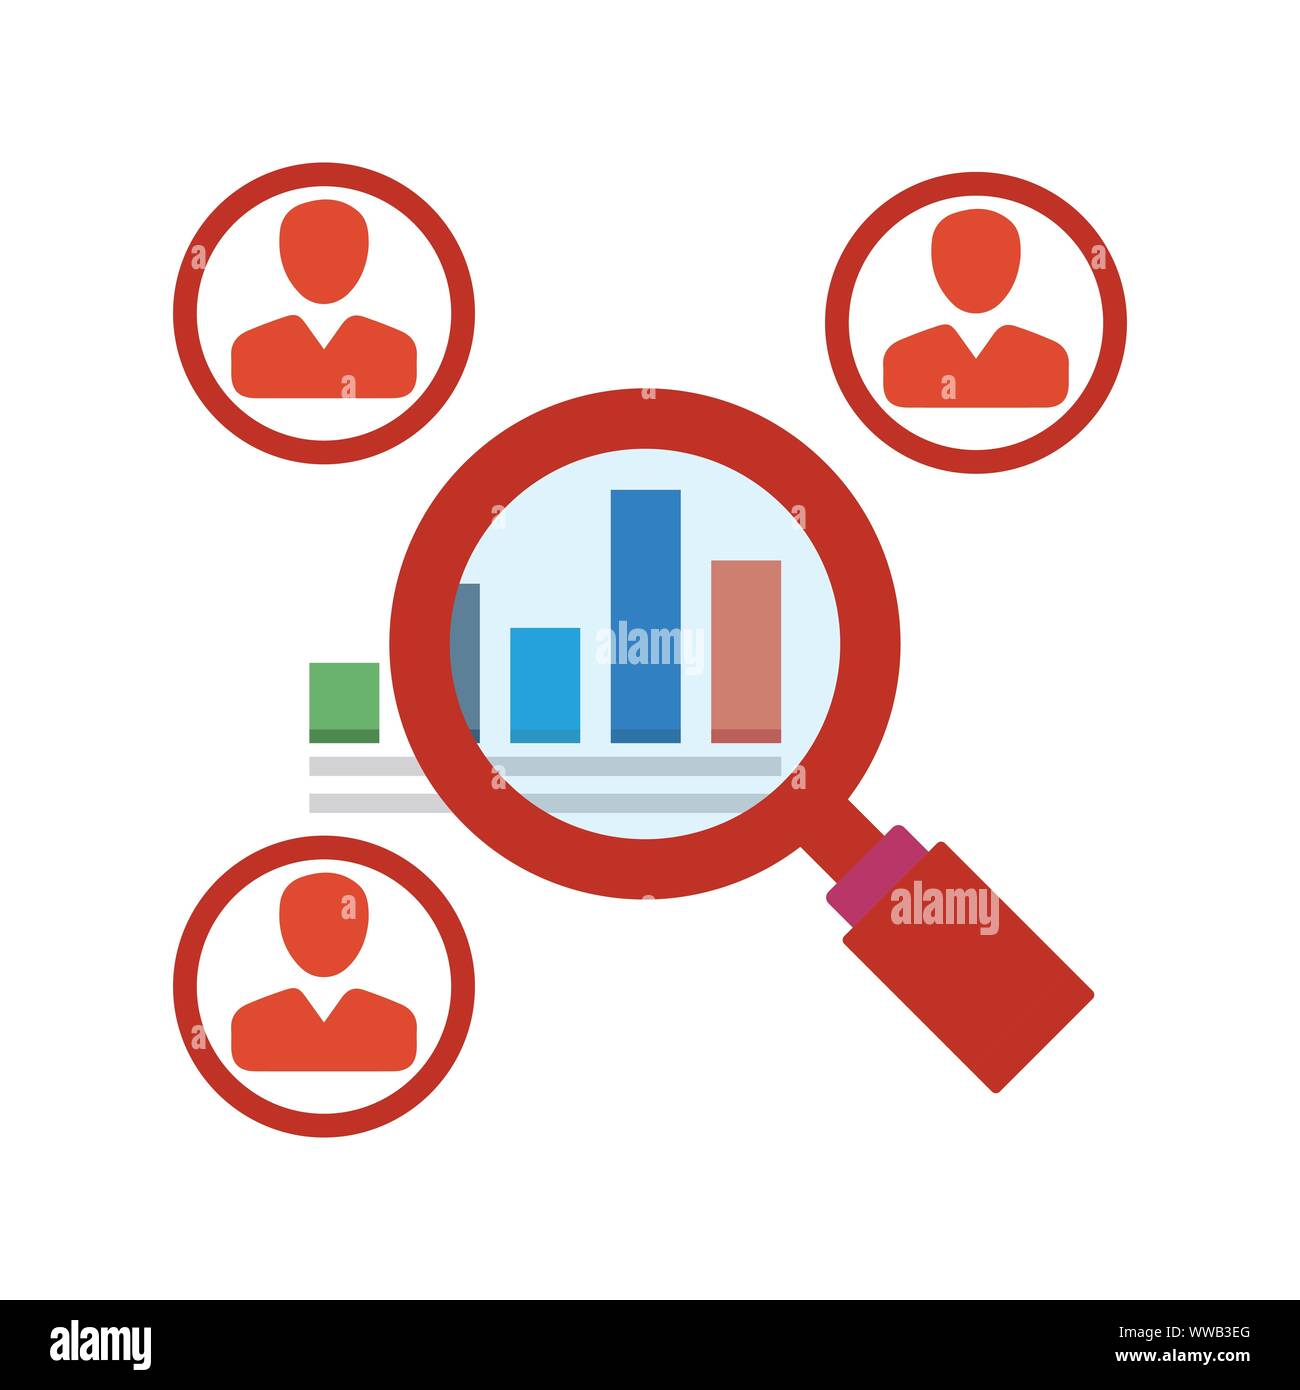 Search Researcher Icon Magnifying Focus On Business Stock Vector Image Art Alamy Alamy.com has google pr 6 and its top keyword is alamy with 1.59% of search traffic. https www alamy com search researcher icon magnifying focus on business image273766152 html